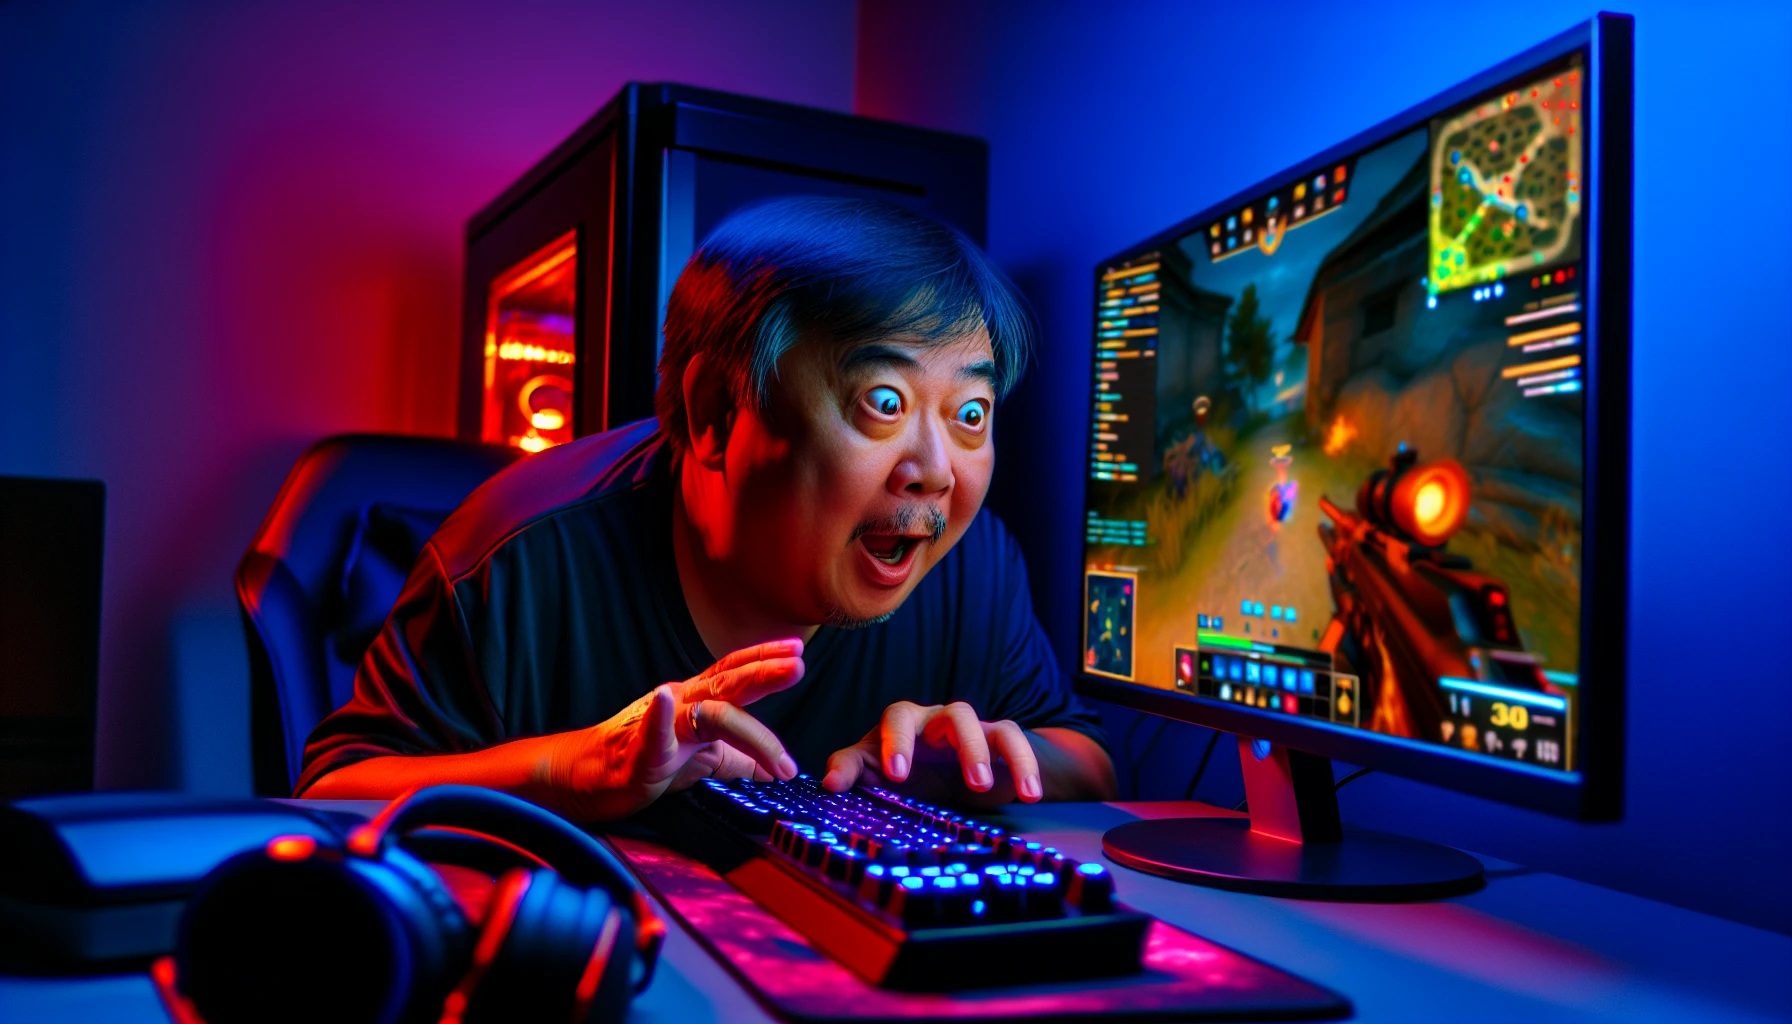 A photo capturing the immersive experience of PC gaming, featuring a gamer engaged in a popular game on a high-performance personal computer.